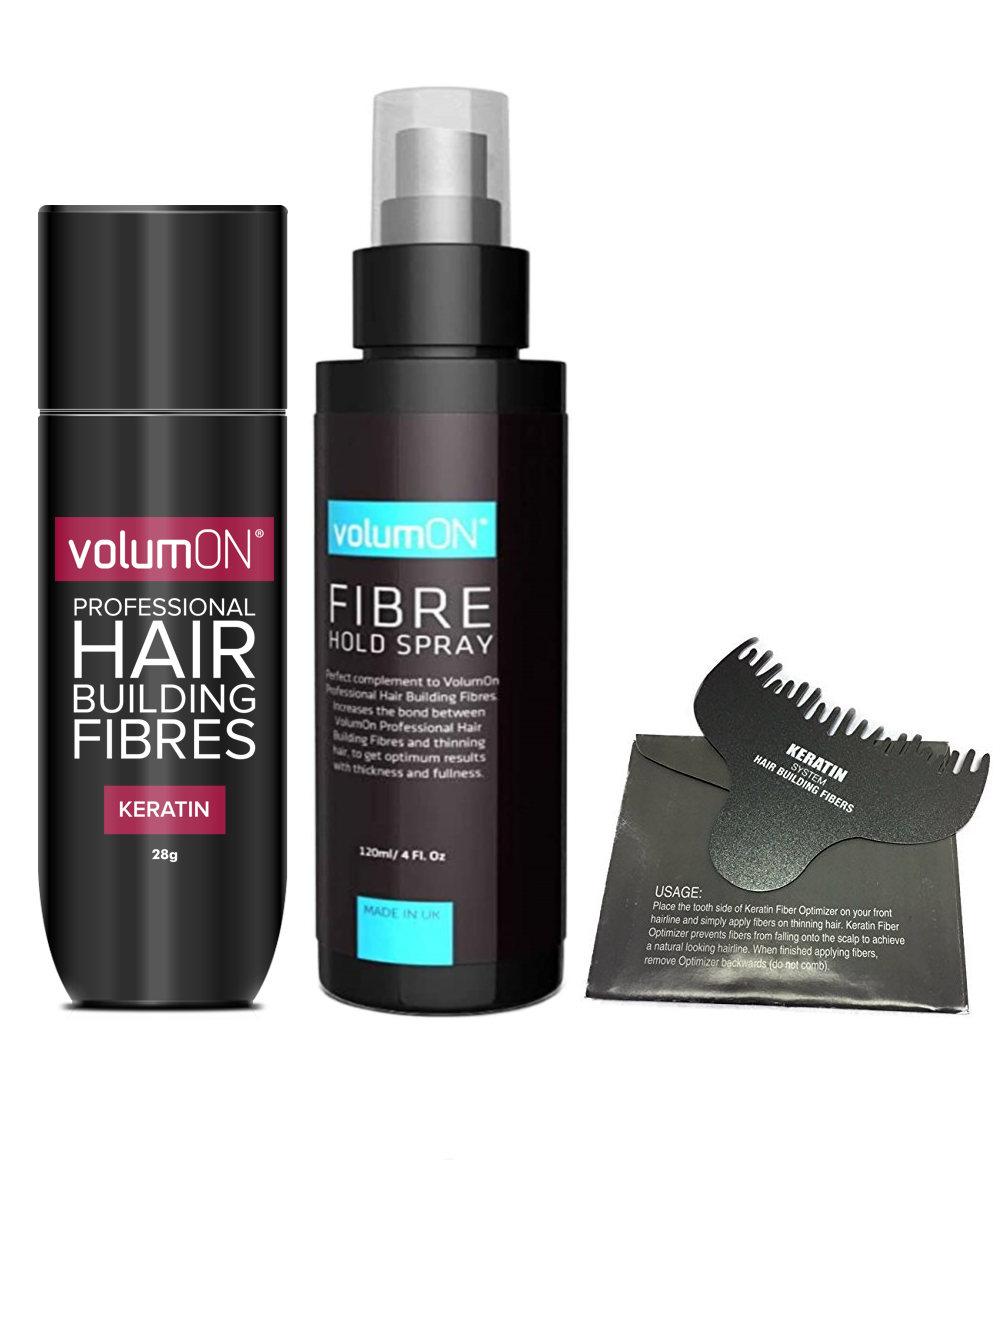 Volumon KERATIN Hair Loss Building Fibres Kit 12g or 28g with Fibre Hold Spray and Optimiser Comb